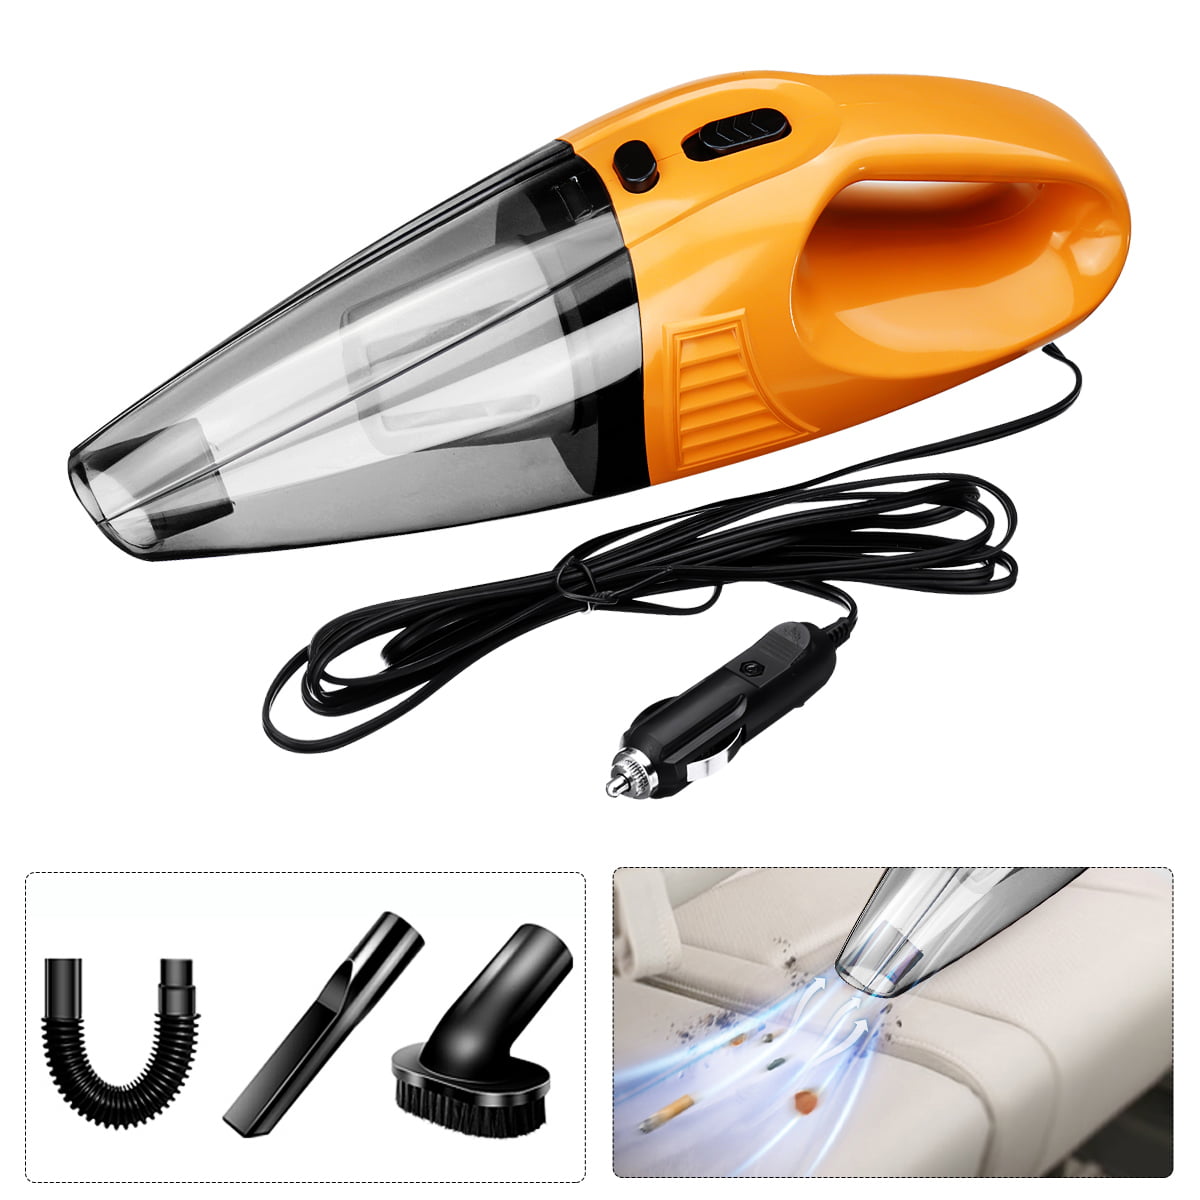 High Power Corded Handheld Vacuum Best Car & Auto Accessories Kit for Detailing and Cleaning Car Interior CarCome Portable Car Vacuum Cleaner